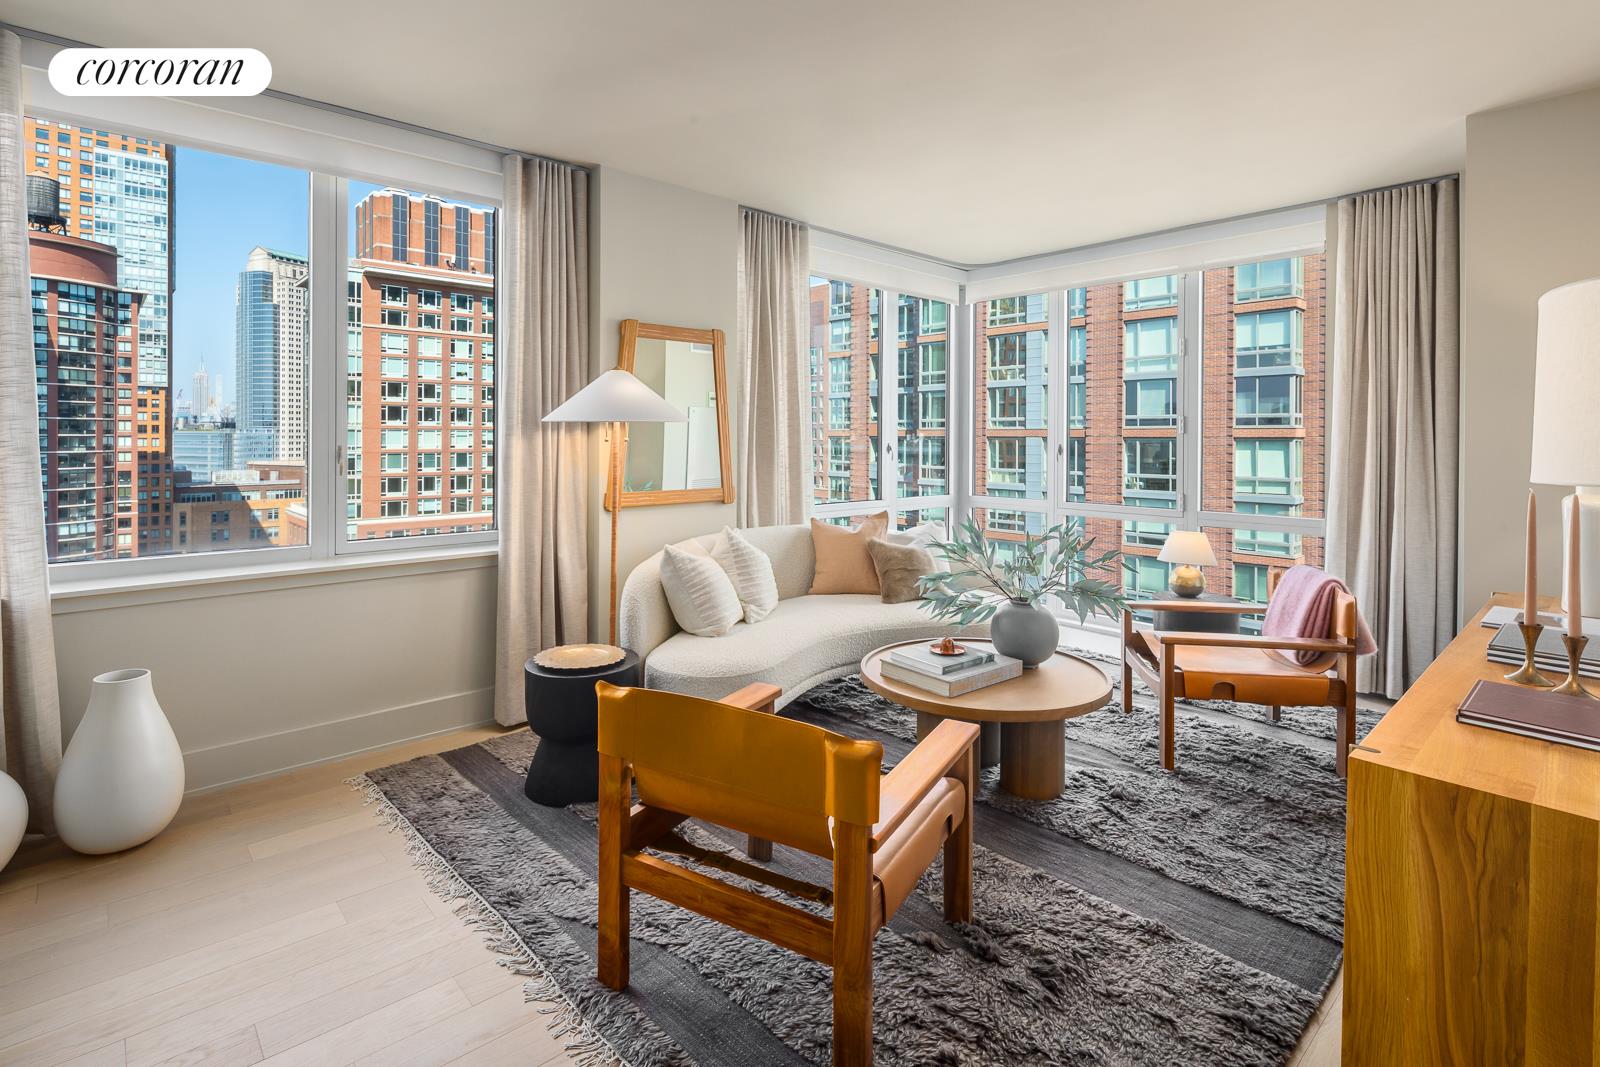 20 River Terrace 28A, Battery Park City, Downtown, NYC - 3 Bedrooms  
3 Bathrooms  
6 Rooms - 